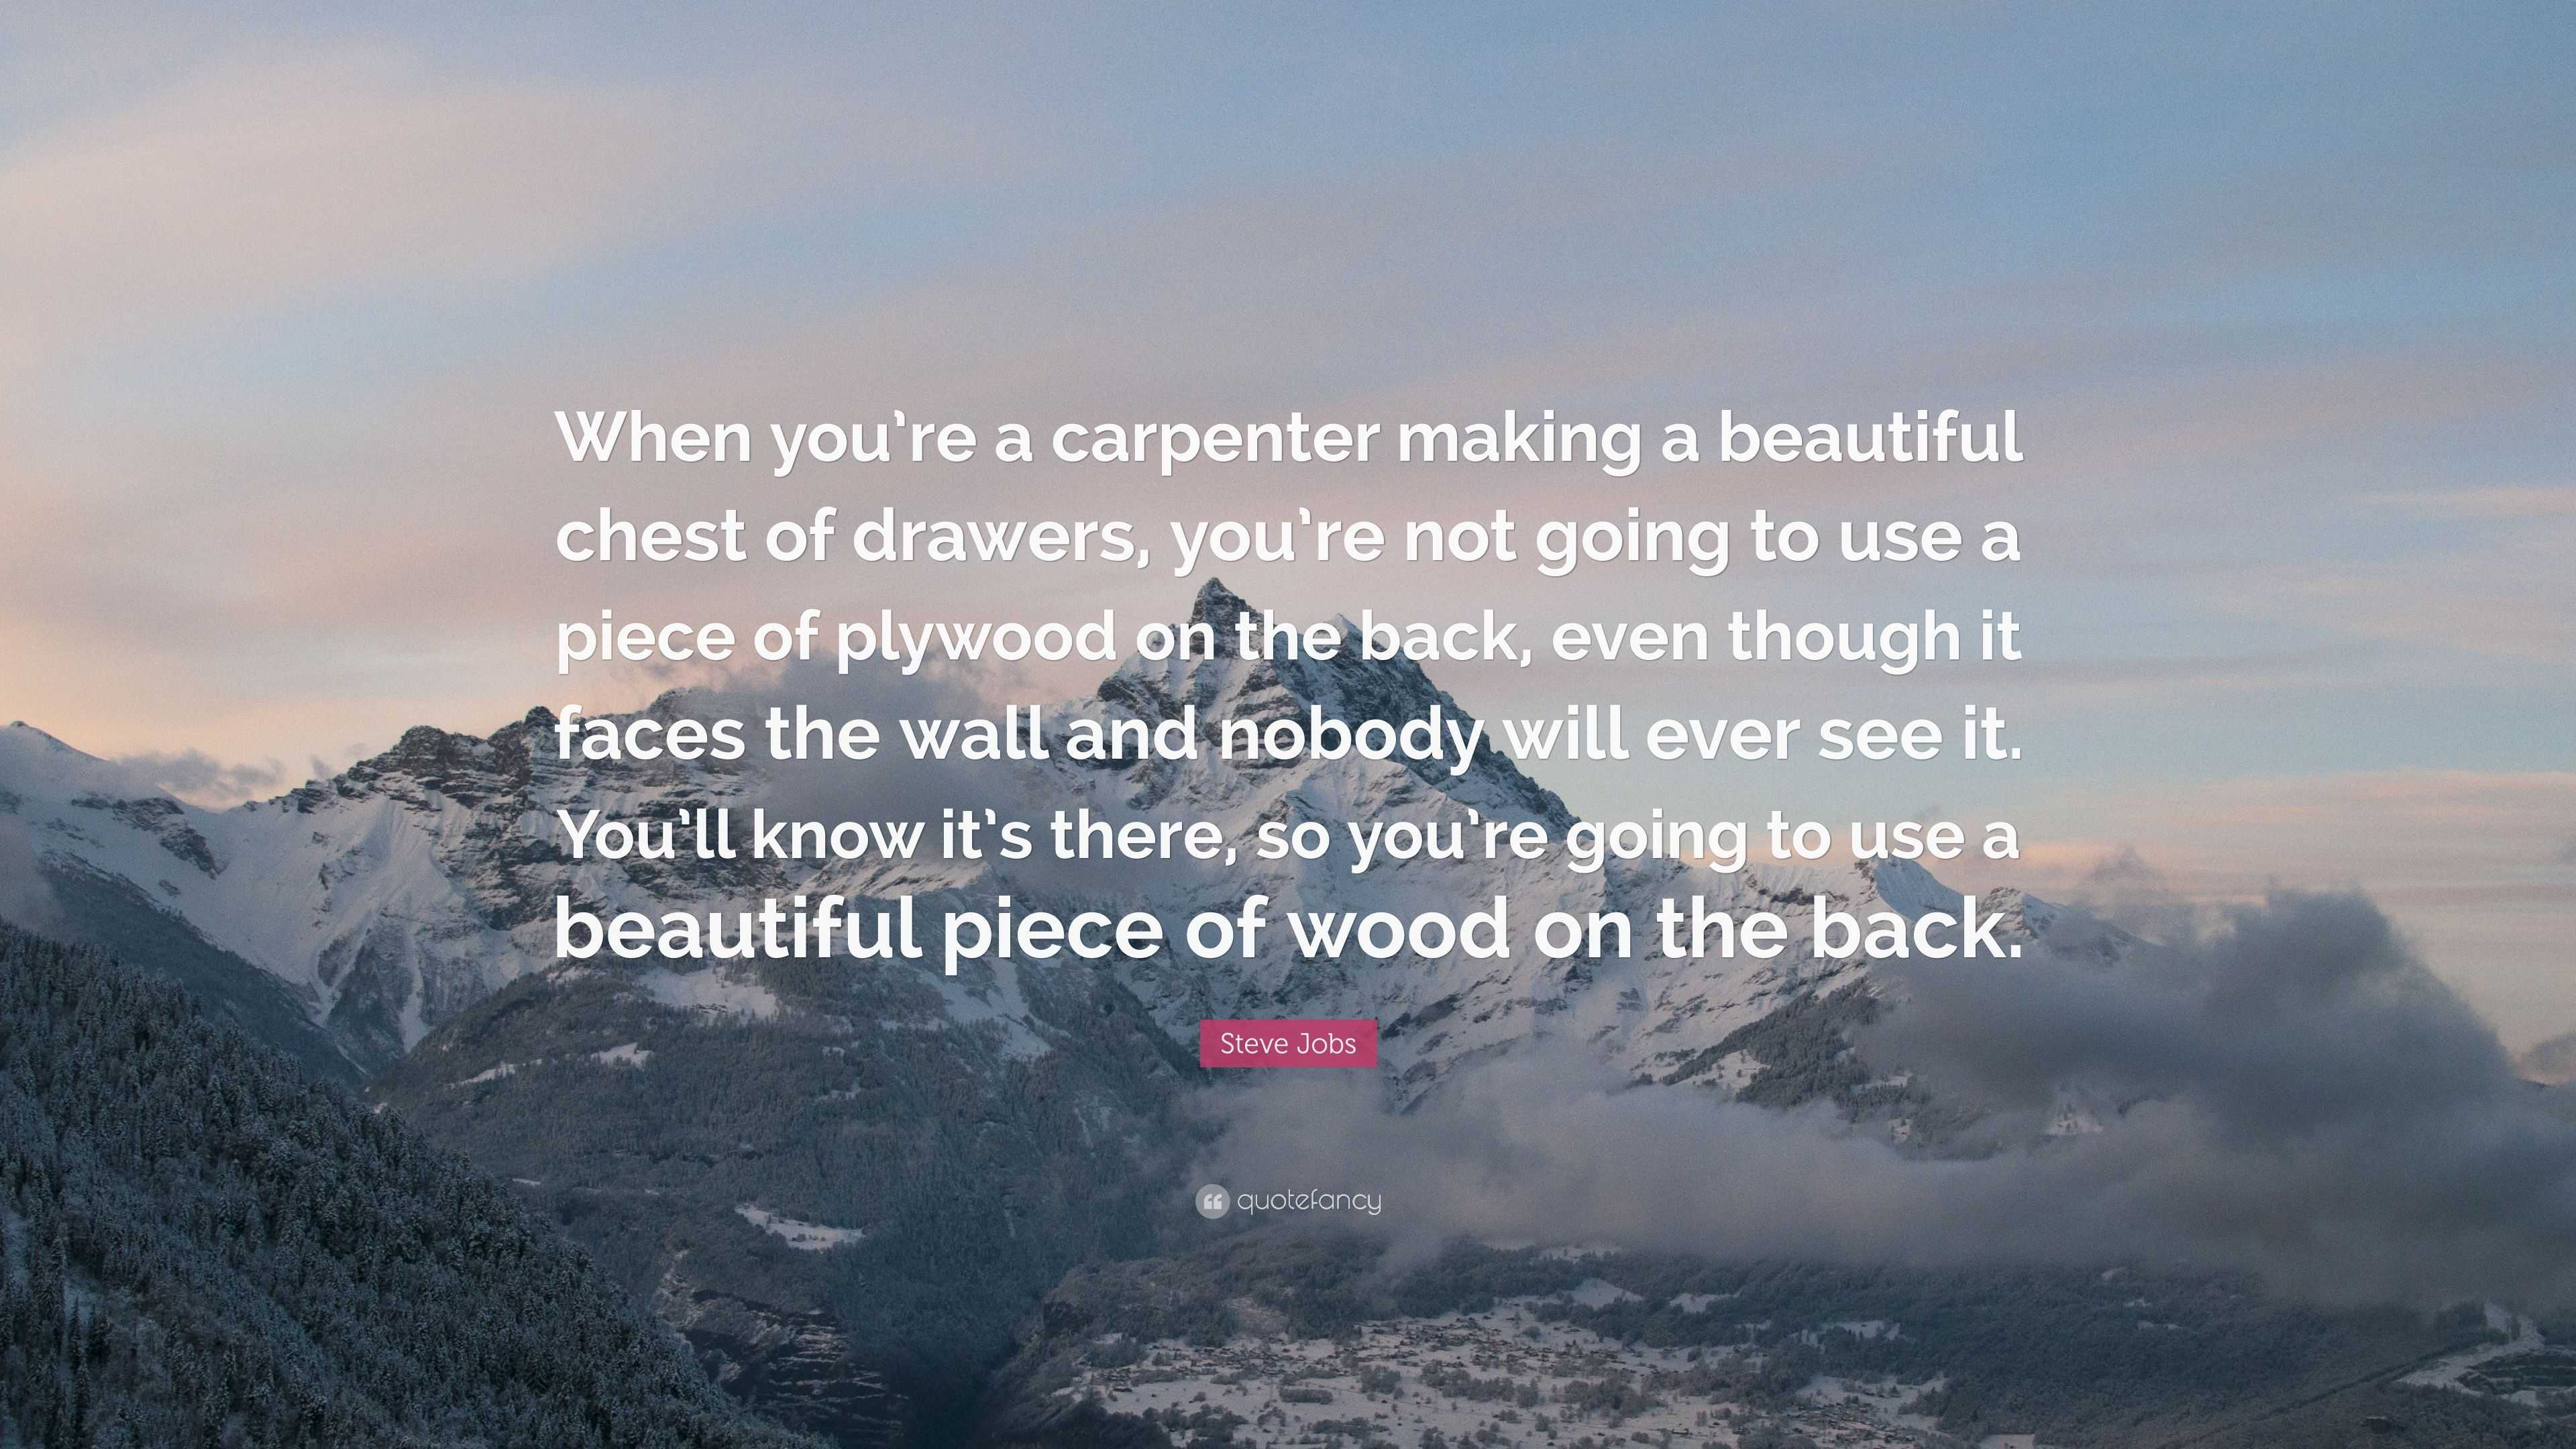 Steve Jobs Quote: “When you&#39;re a carpenter making a beautiful chest of drawers, you&#39;re not going to use a piece of plywood on the back, eve...”